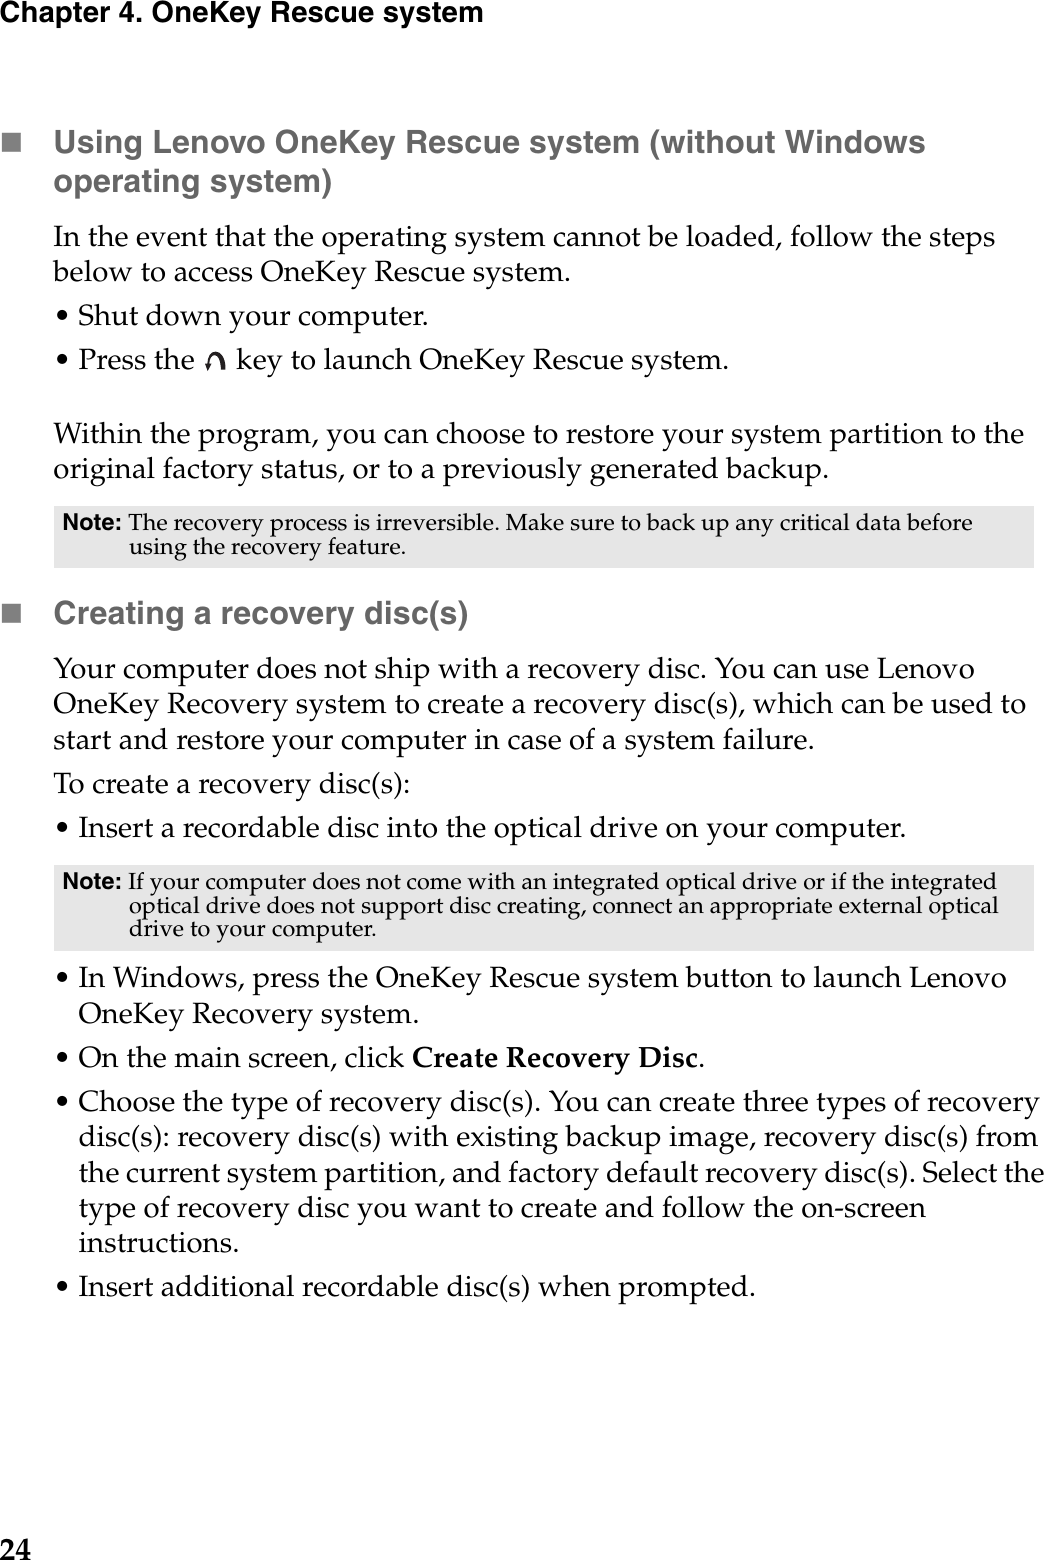 24Chapter 4. OneKey Rescue systemUsing Lenovo OneKey Rescue system (without Windows operating system)In the event that the operating system cannot be loaded, follow the steps below to access OneKey Rescue system.• Shut down your computer.• Press the   key to launch OneKey Rescue system.Within the program, you can choose to restore your system partition to the original factory status, or to a previously generated backup.Creating a recovery disc(s)Your computer does not ship with a recovery disc. You can use Lenovo OneKey Recovery system to create a recovery disc(s), which can be used to start and restore your computer in case of a system failure.To create a recovery disc(s):• Insert a recordable disc into the optical drive on your computer.• In Windows, press the OneKey Rescue system button to launch Lenovo OneKey Recovery system.• On the main screen, click Create Recovery Disc.• Choose the type of recovery disc(s). You can create three types of recovery disc(s): recovery disc(s) with existing backup image, recovery disc(s) from the current system partition, and factory default recovery disc(s). Select the type of recovery disc you want to create and follow the on-screen instructions.• Insert additional recordable disc(s) when prompted.Note: The recovery process is irreversible. Make sure to back up any critical data before using the recovery feature.Note: If your computer does not come with an integrated optical drive or if the integrated optical drive does not support disc creating, connect an appropriate external optical drive to your computer. 